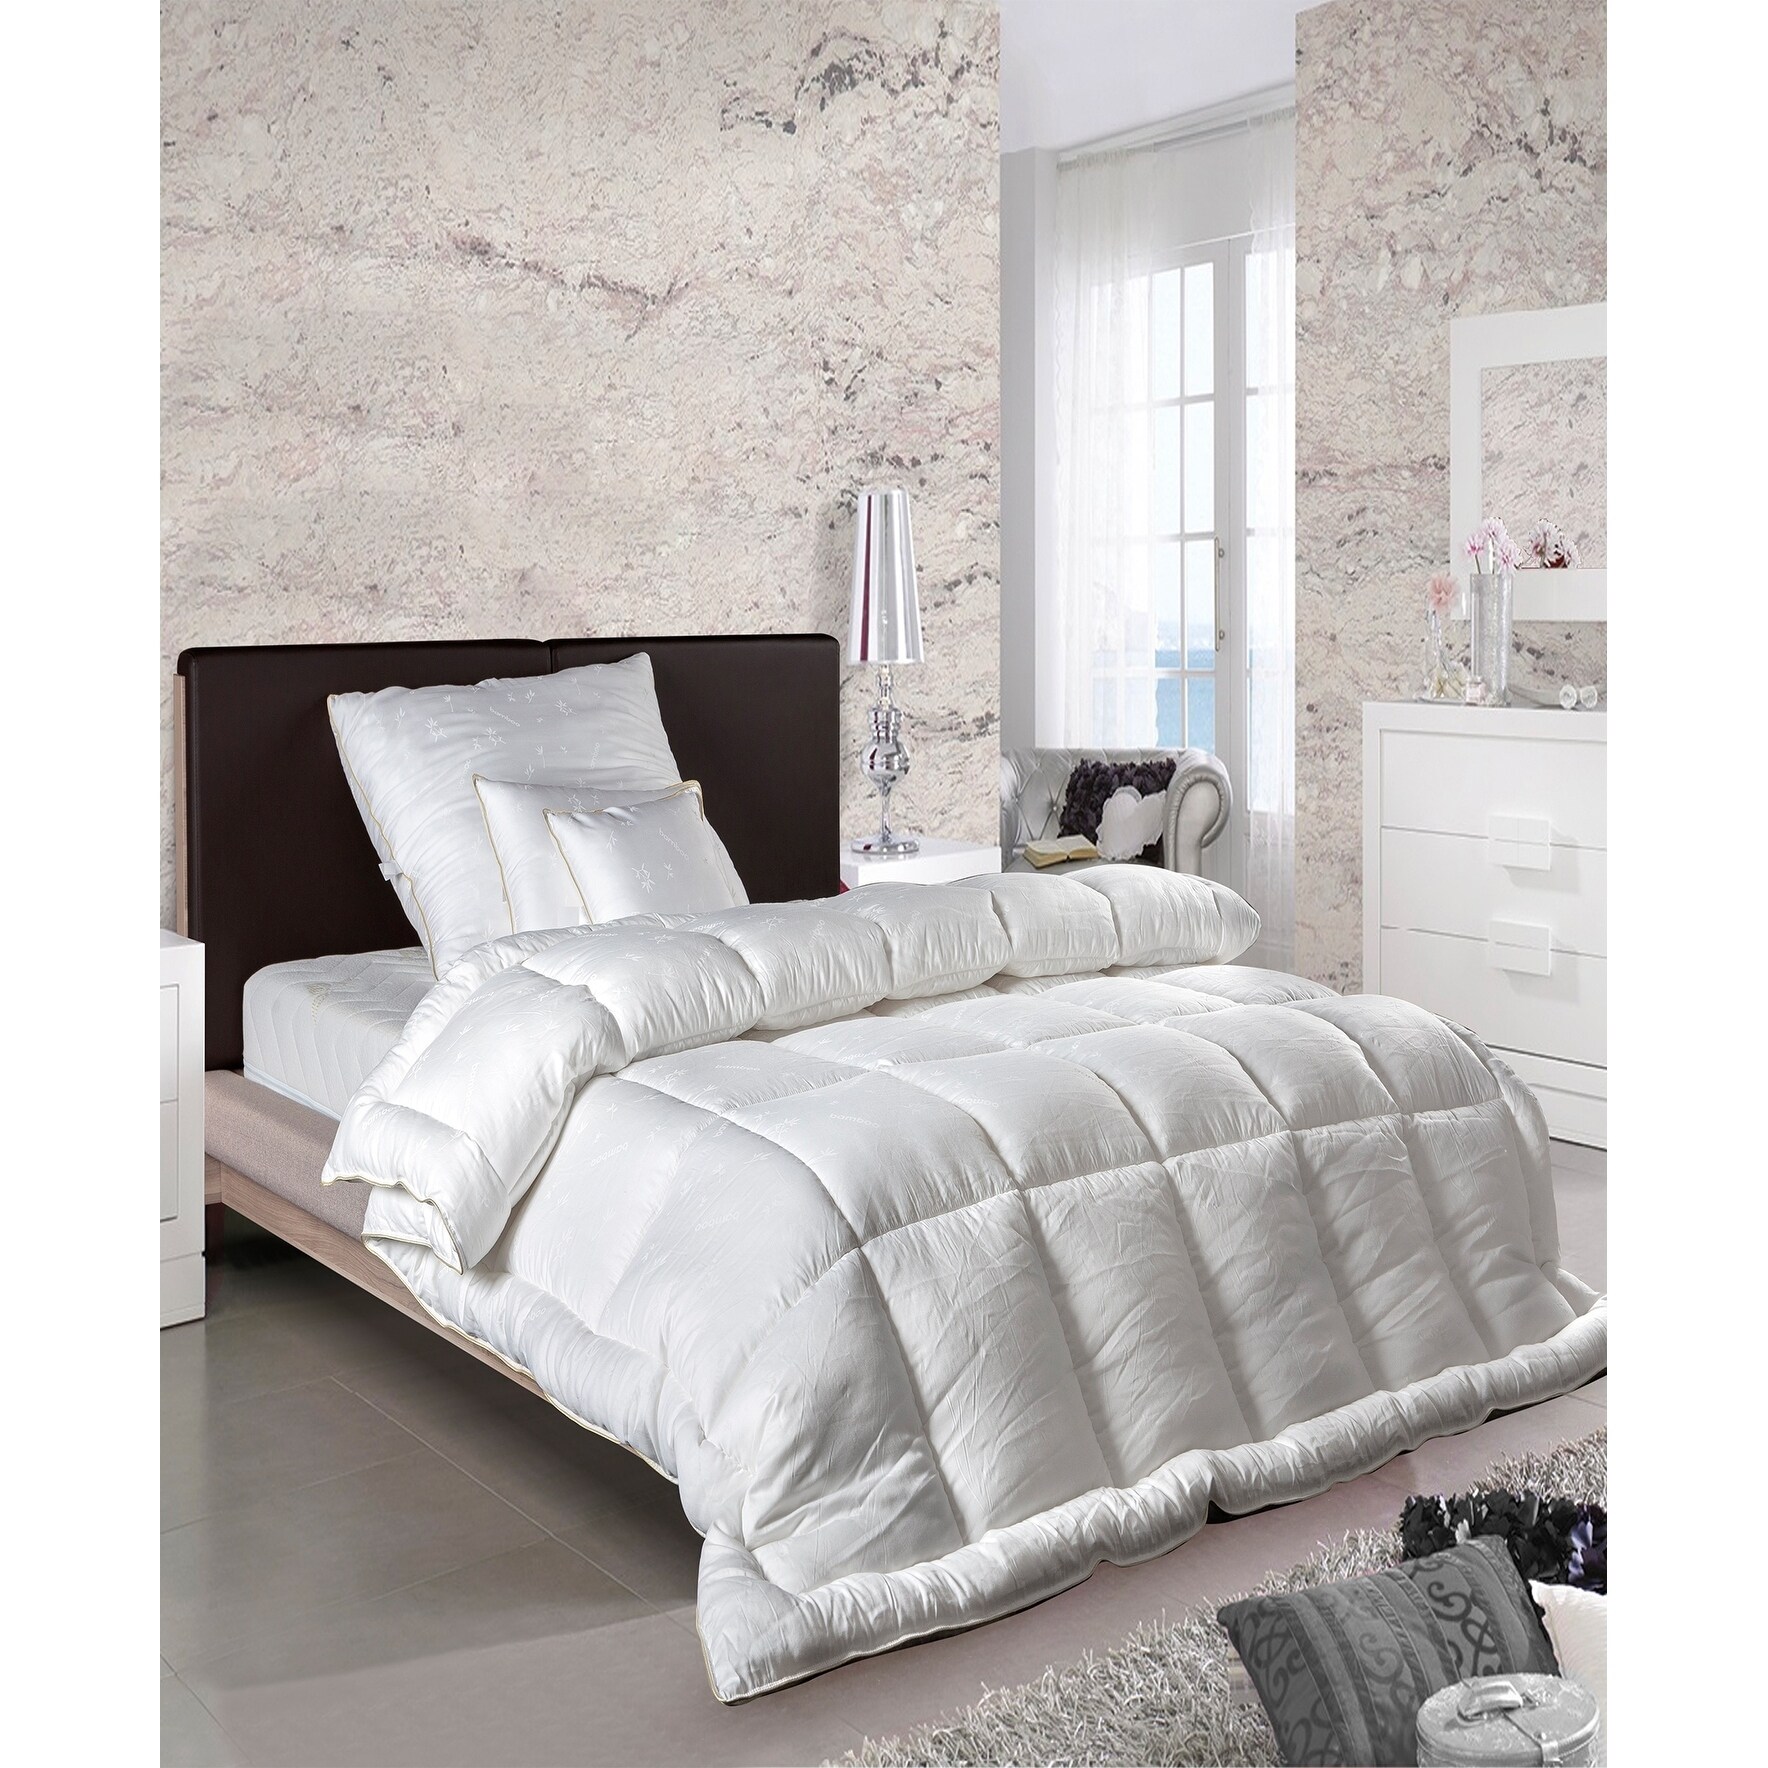 Computer Quilted Construction Duck Feather Down Duvet S-King Quilt 13.5 Tog Luxury Comforter Deluxe Duvet Super Soft Warm and Cosy Self piping Best Hotel Quality Anti Allergy